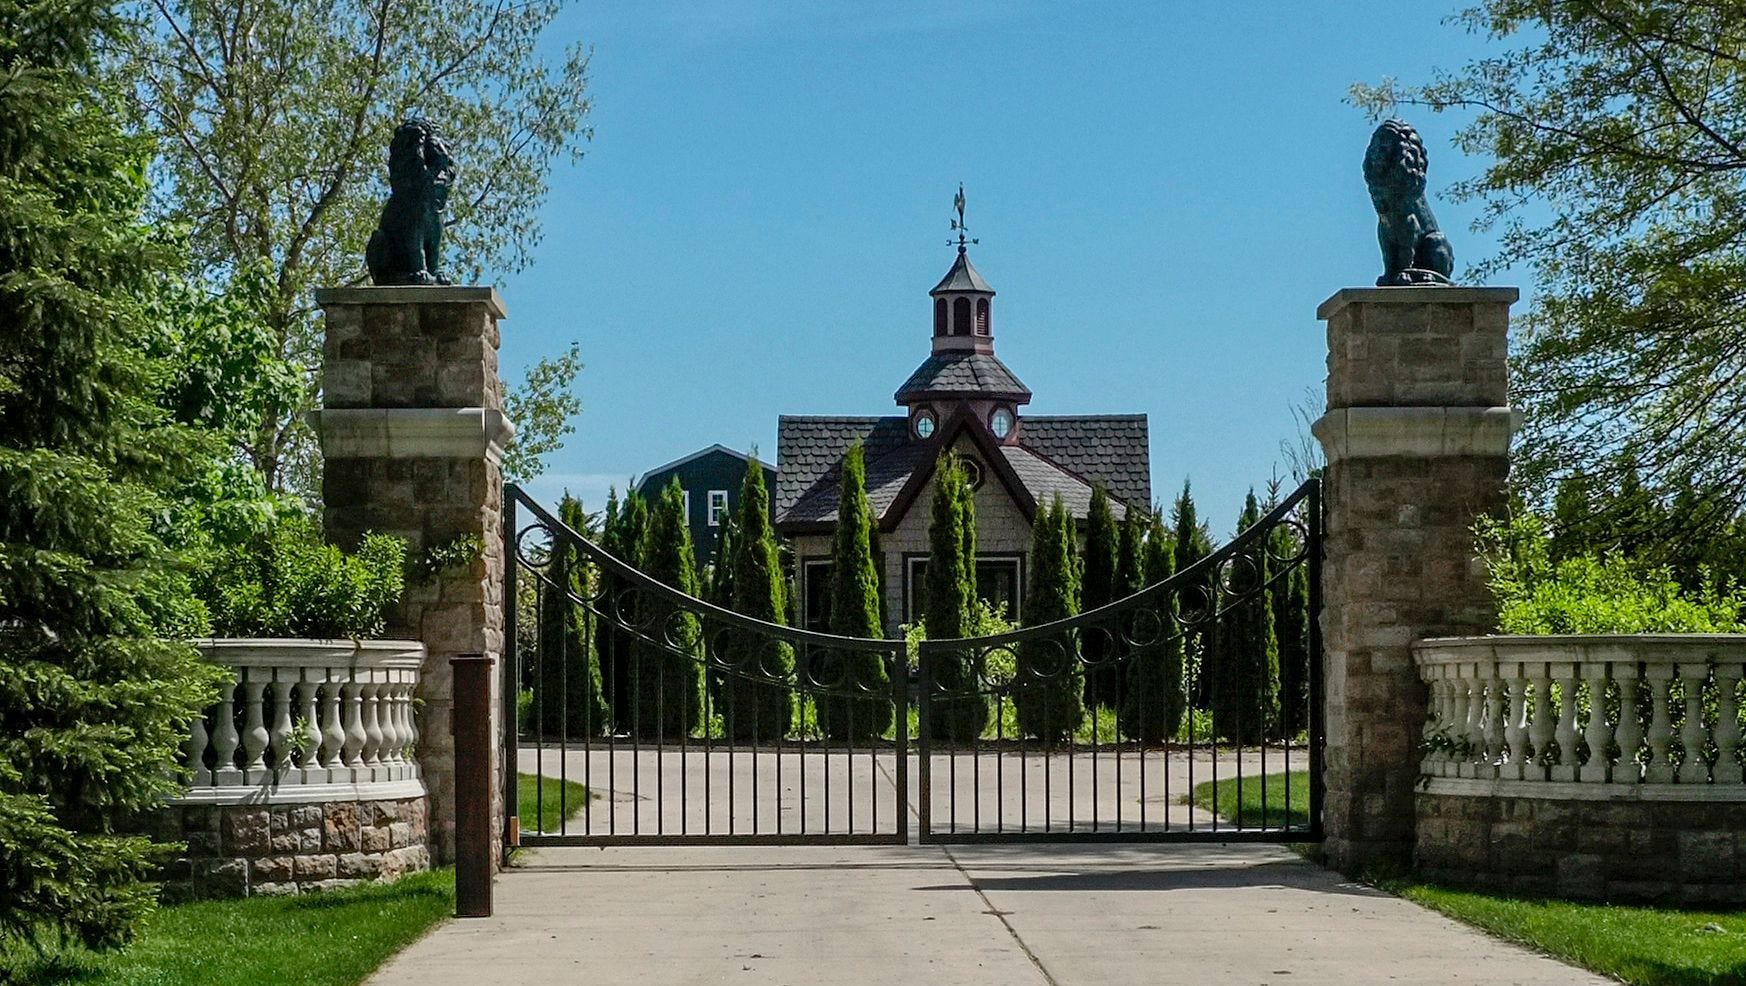 The entrance to the Williamston, Michigan home of the Rev. Jon Wehrle features a gate anchored by two stone columns. The Catholic priest is accused of embezzling $5 million from St. Martha's Church in Okemos over at least 19 years.